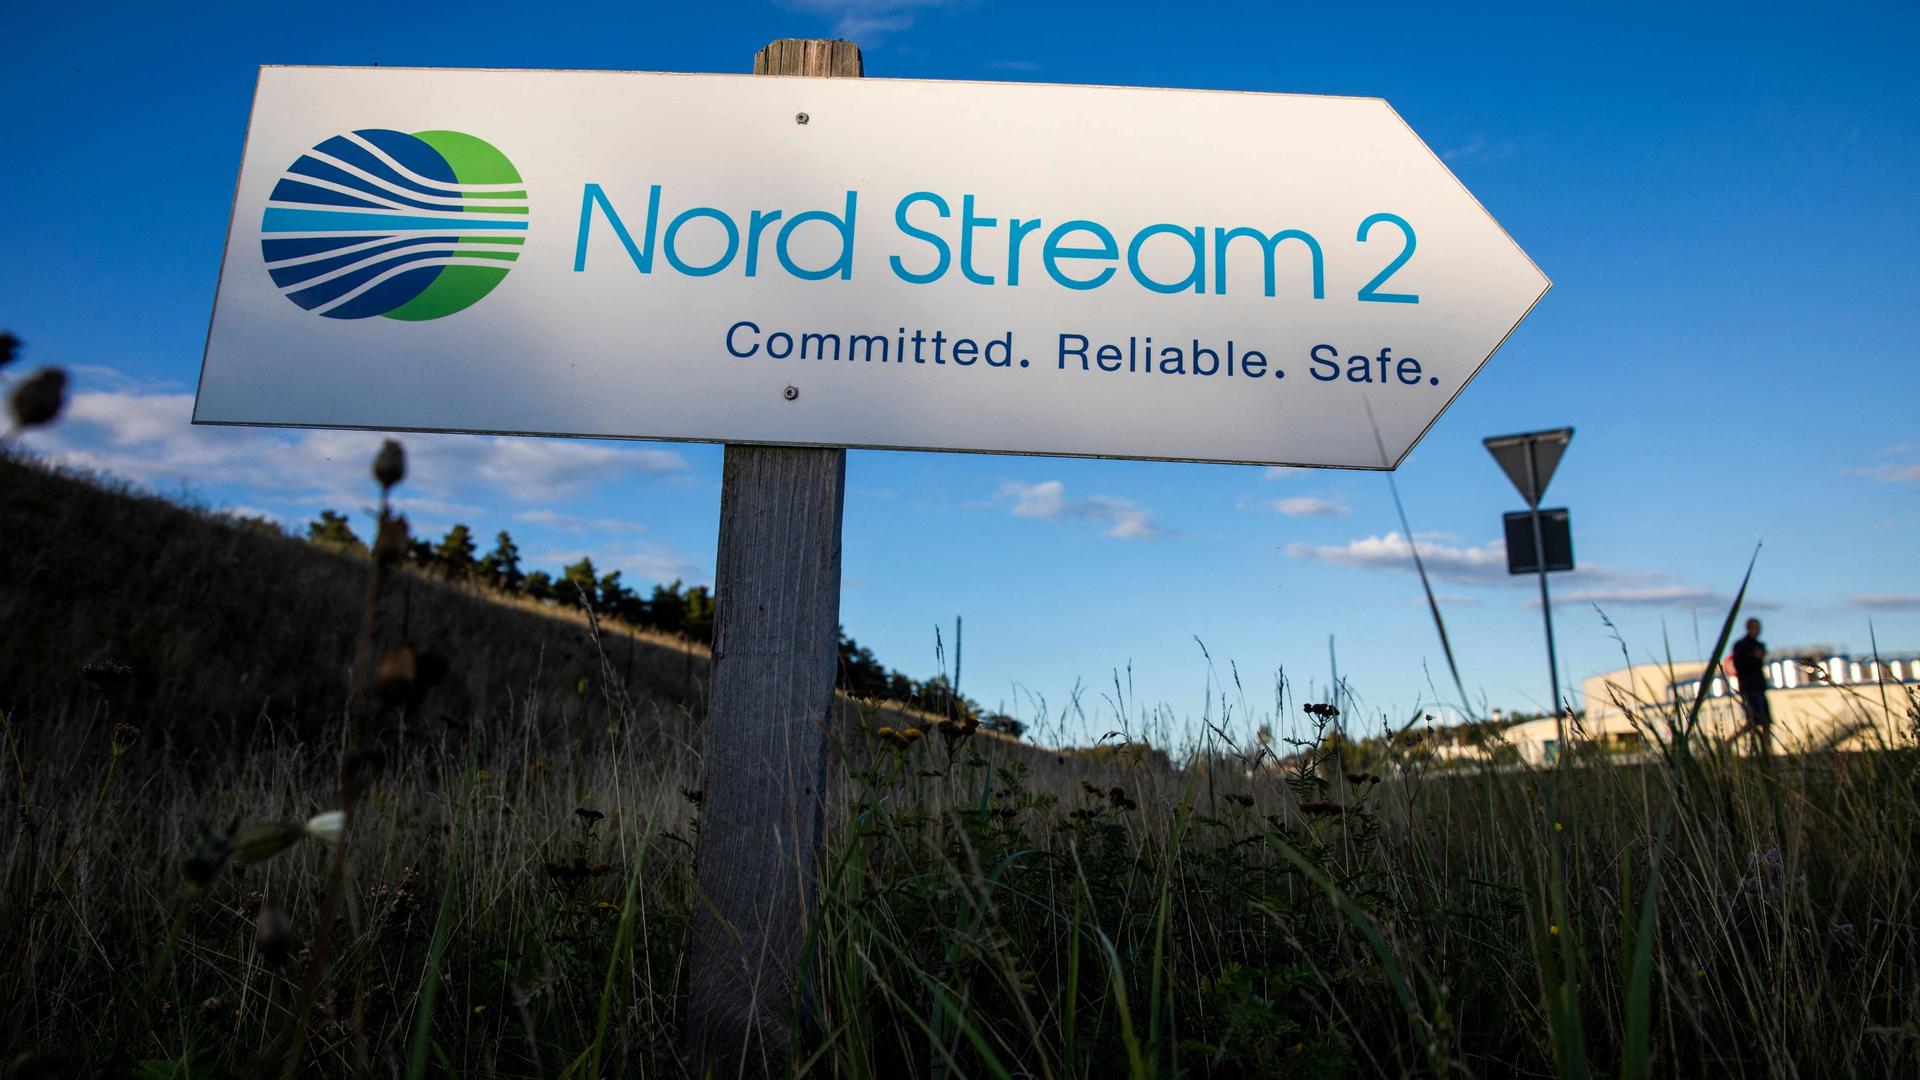 A road sign directing traffic towards the Nord Stream 2 gas line landfall facility entrance in Lubmin, north eastern German